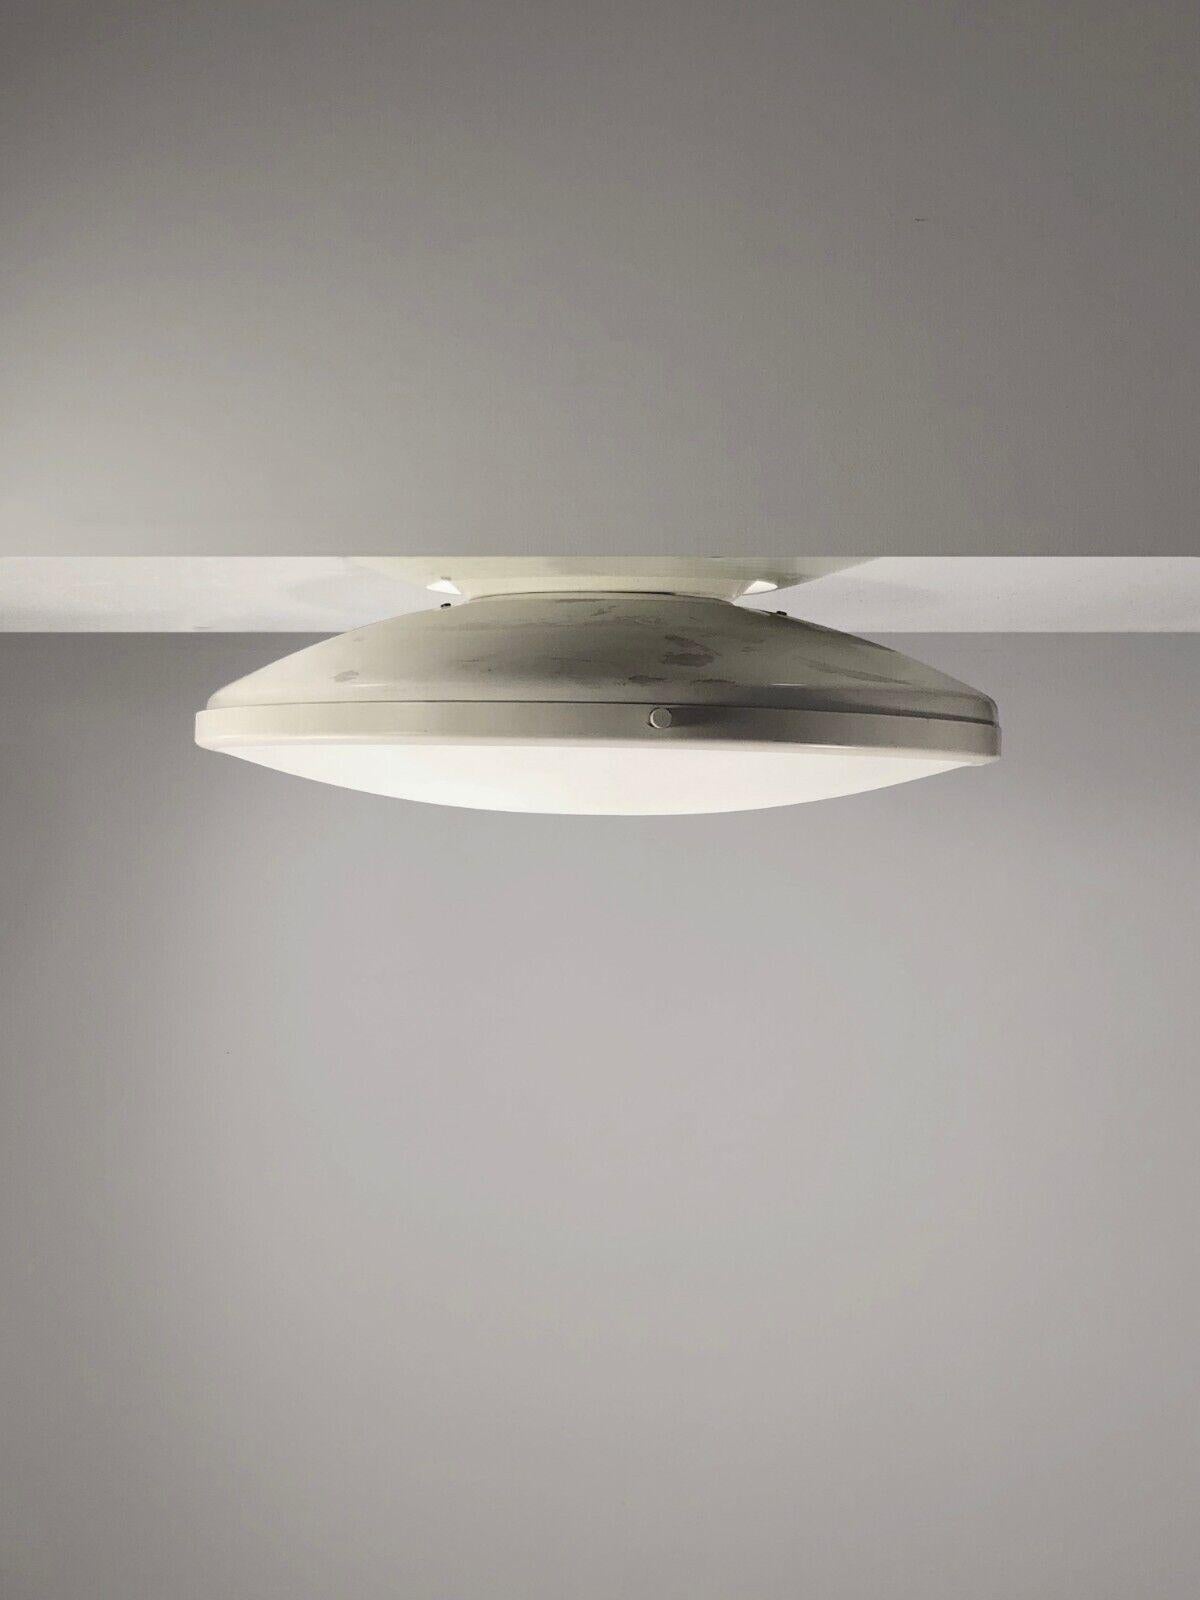 A rare, iconic and authentic circular ceiling light with space inspiration, Modernist, Space-Age, Forme-Libre, ovoid body and frame in off-white lacquered metal screwed by 3 lacquered screws, sandblasted frosten curved glass, by Pierre Paulin,